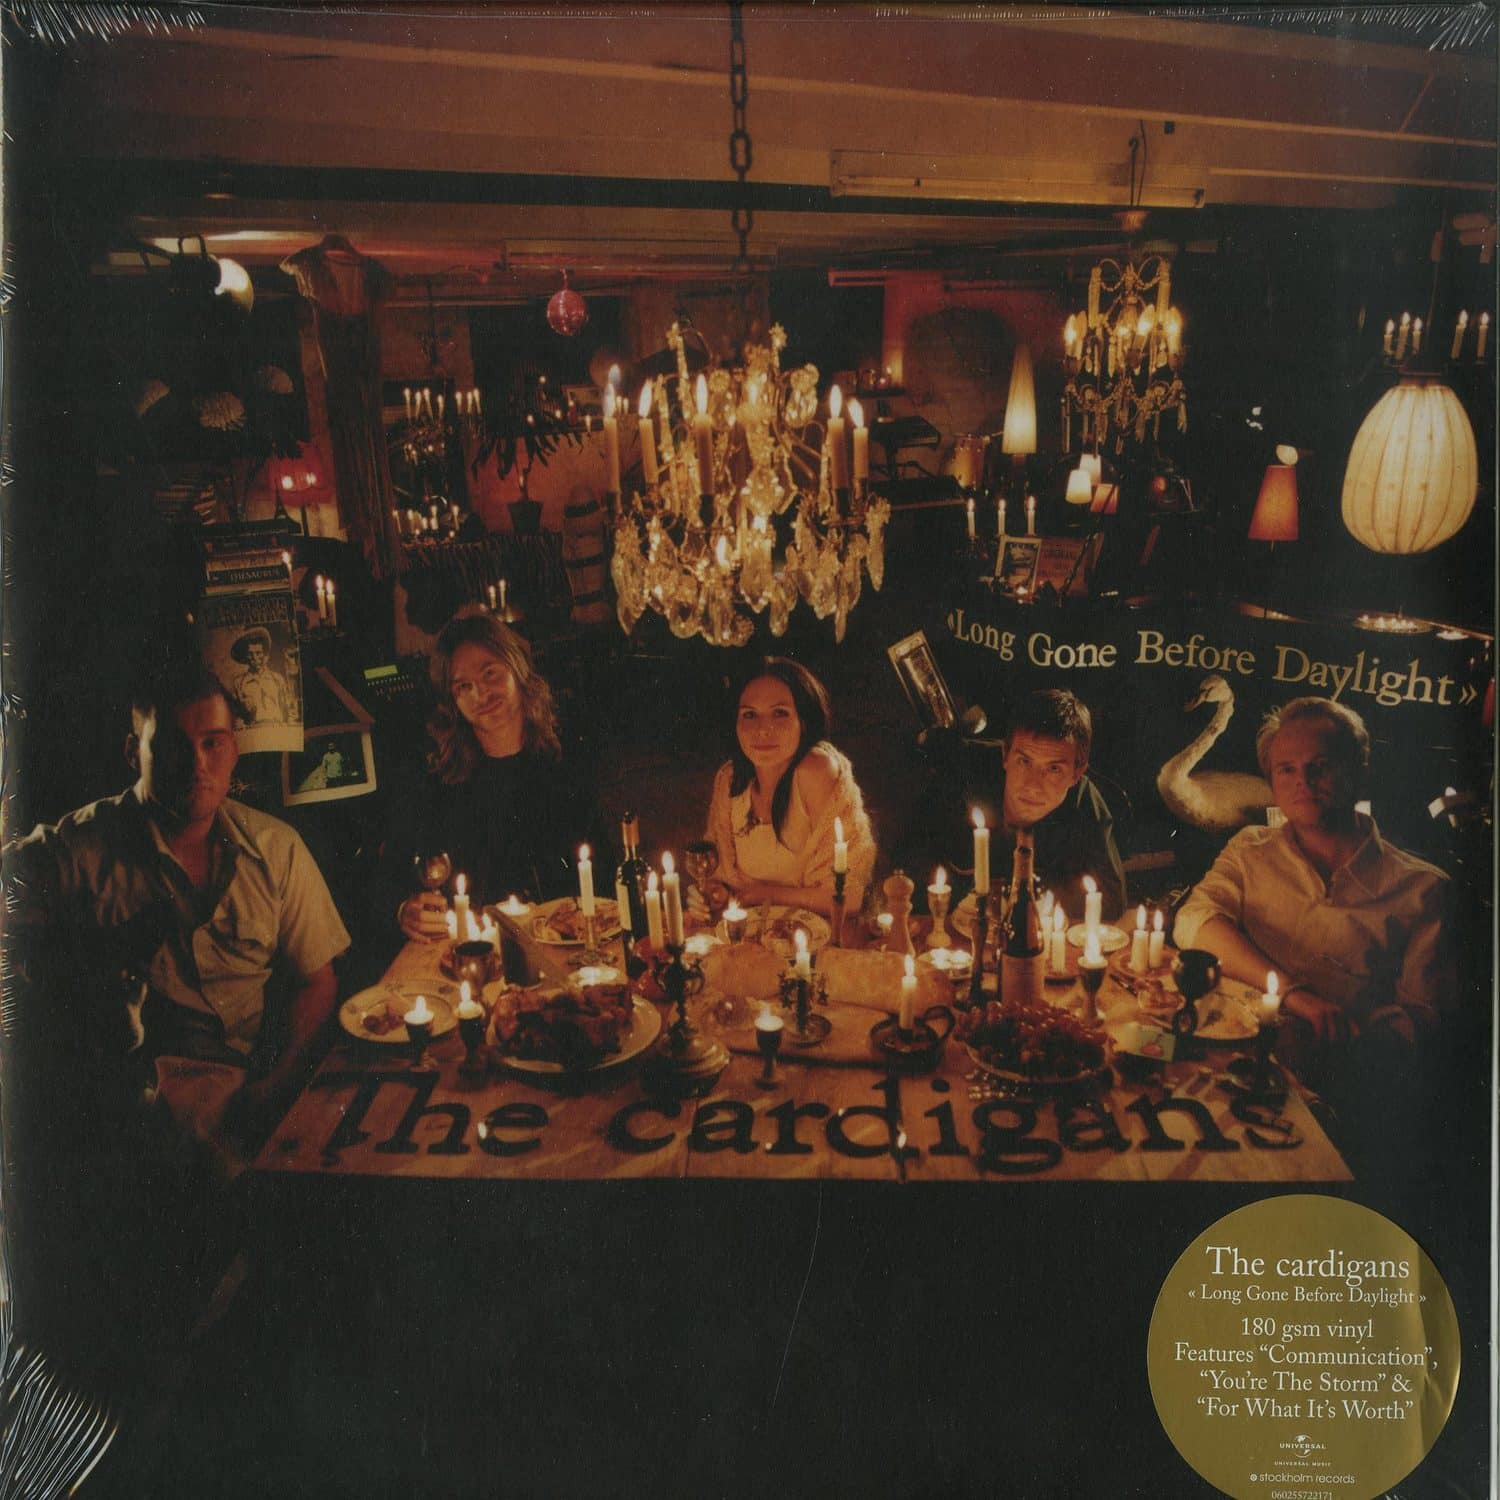 The Cardigans - LONG GONE BEFORE DAYLIGHT 